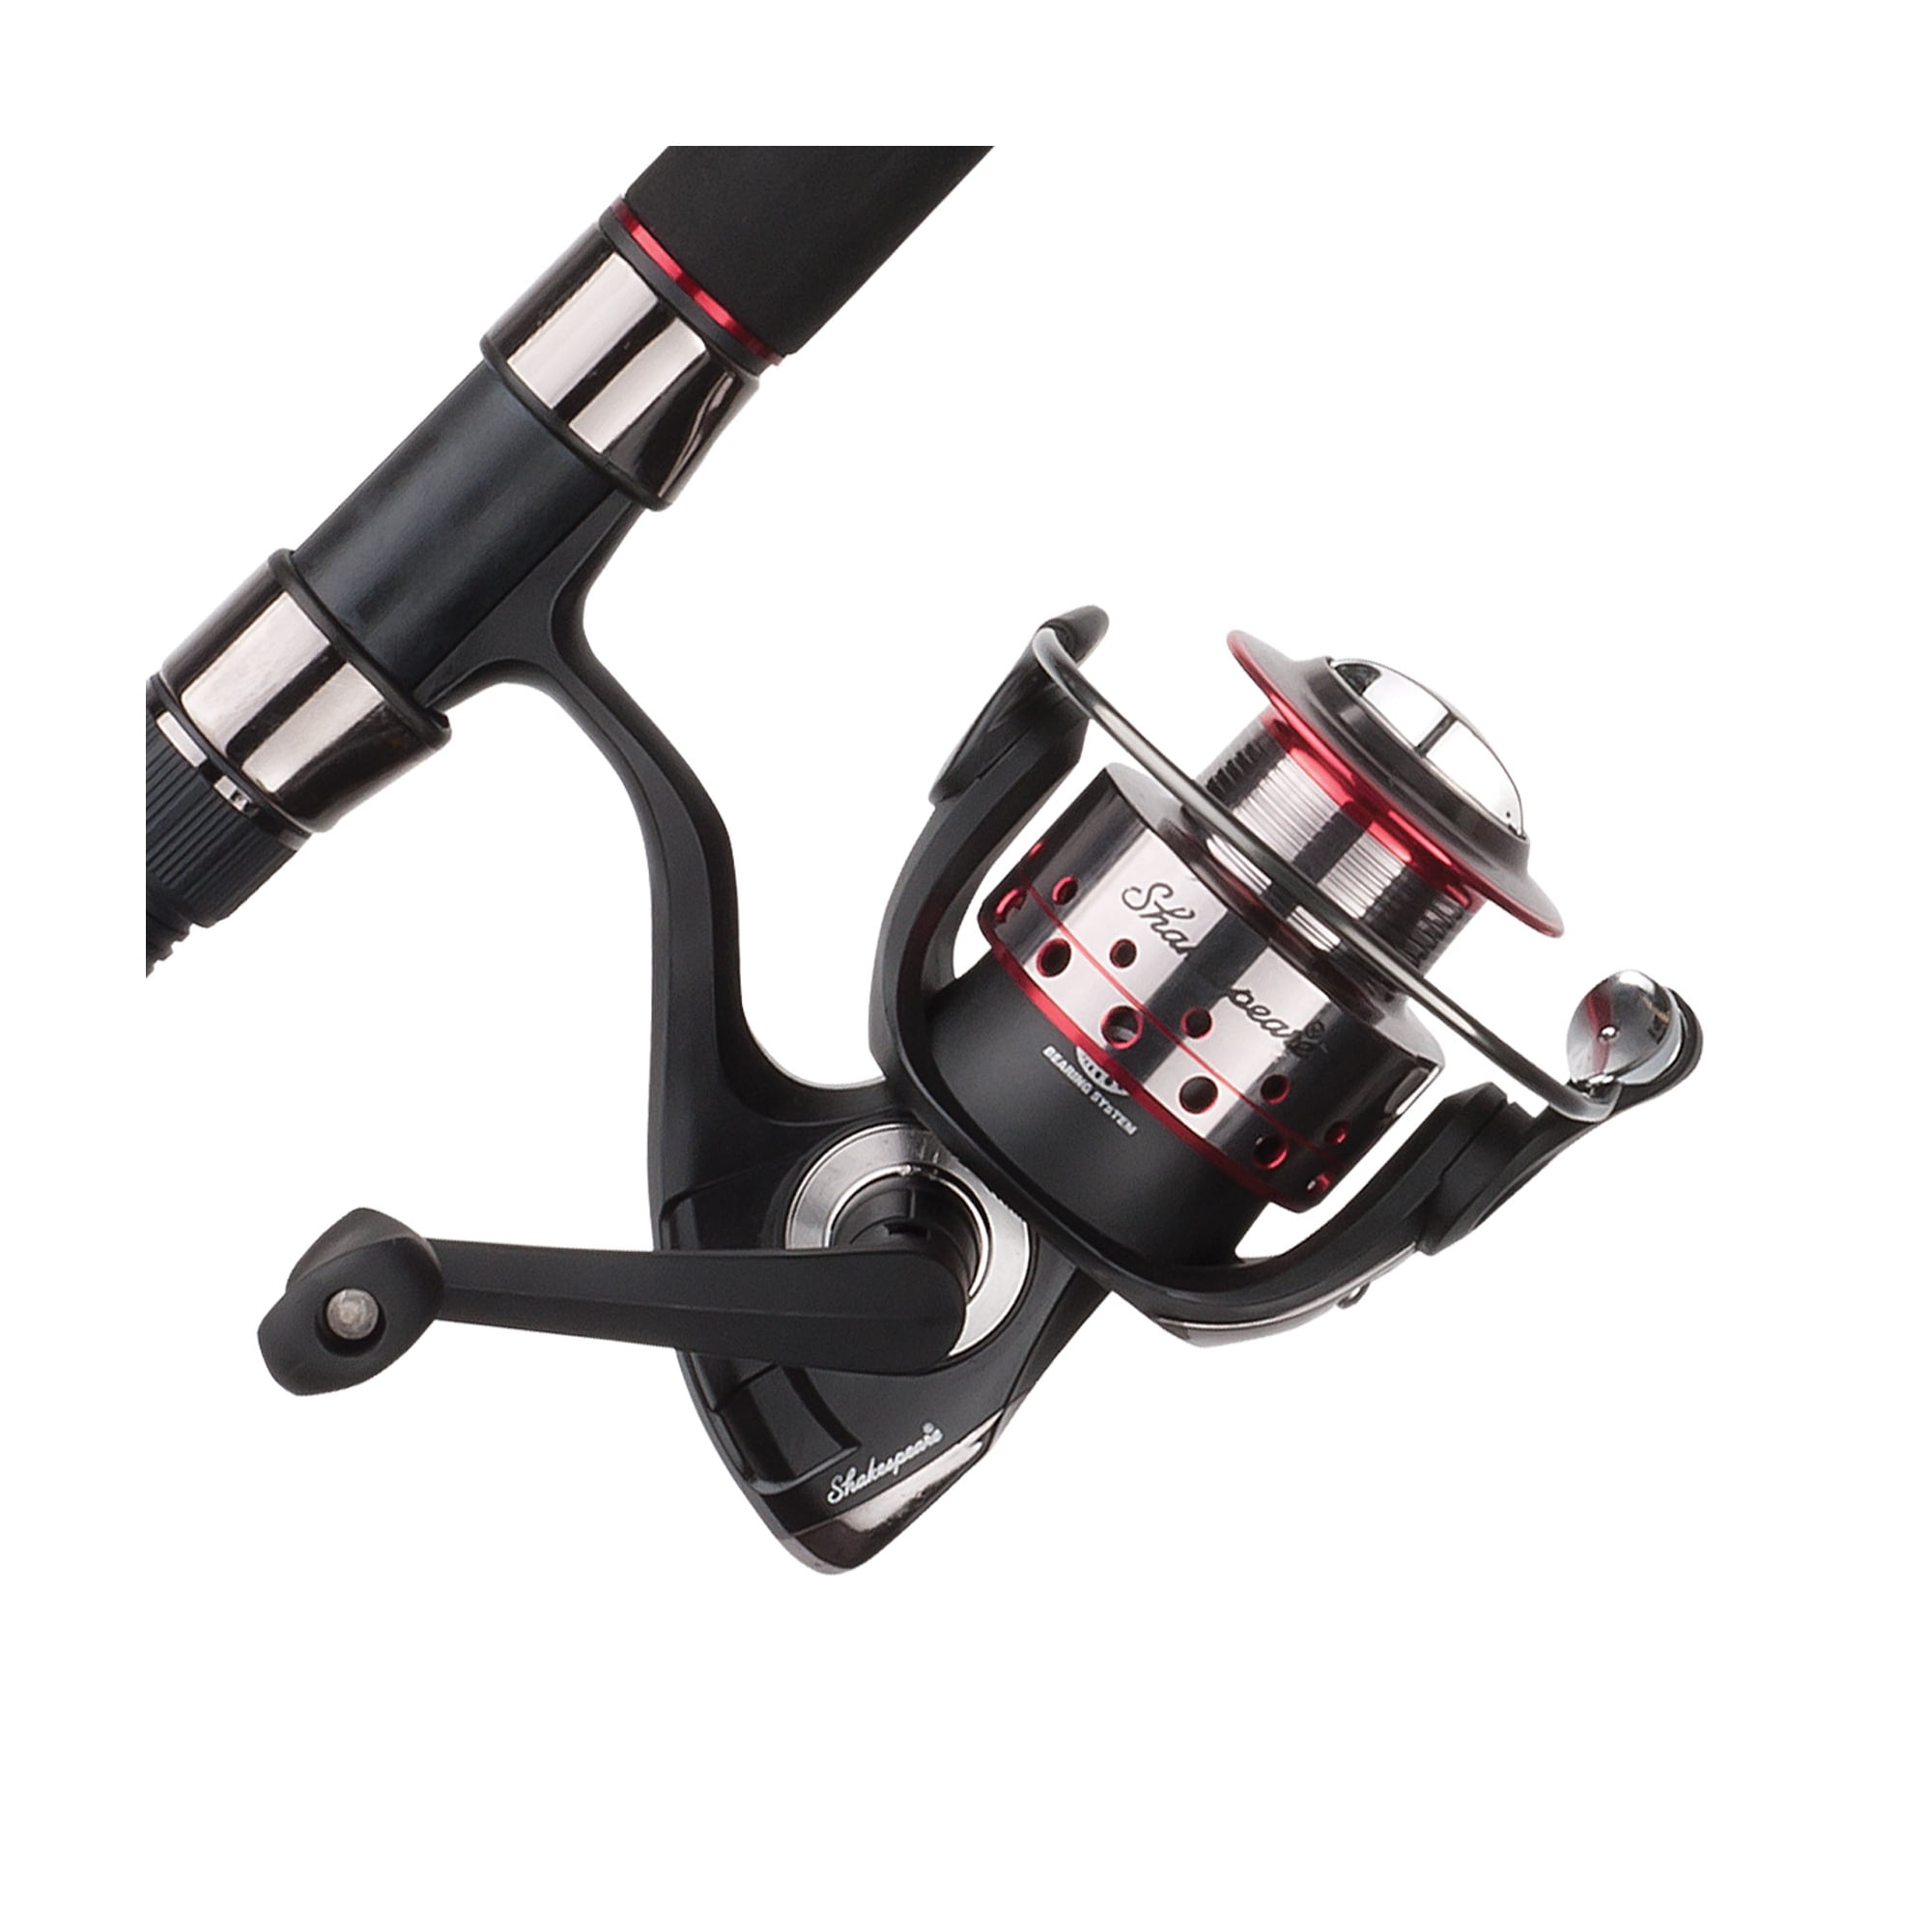 Abu Garcia 7' Max Z Fishing Rod and Reel Spinning Combo 